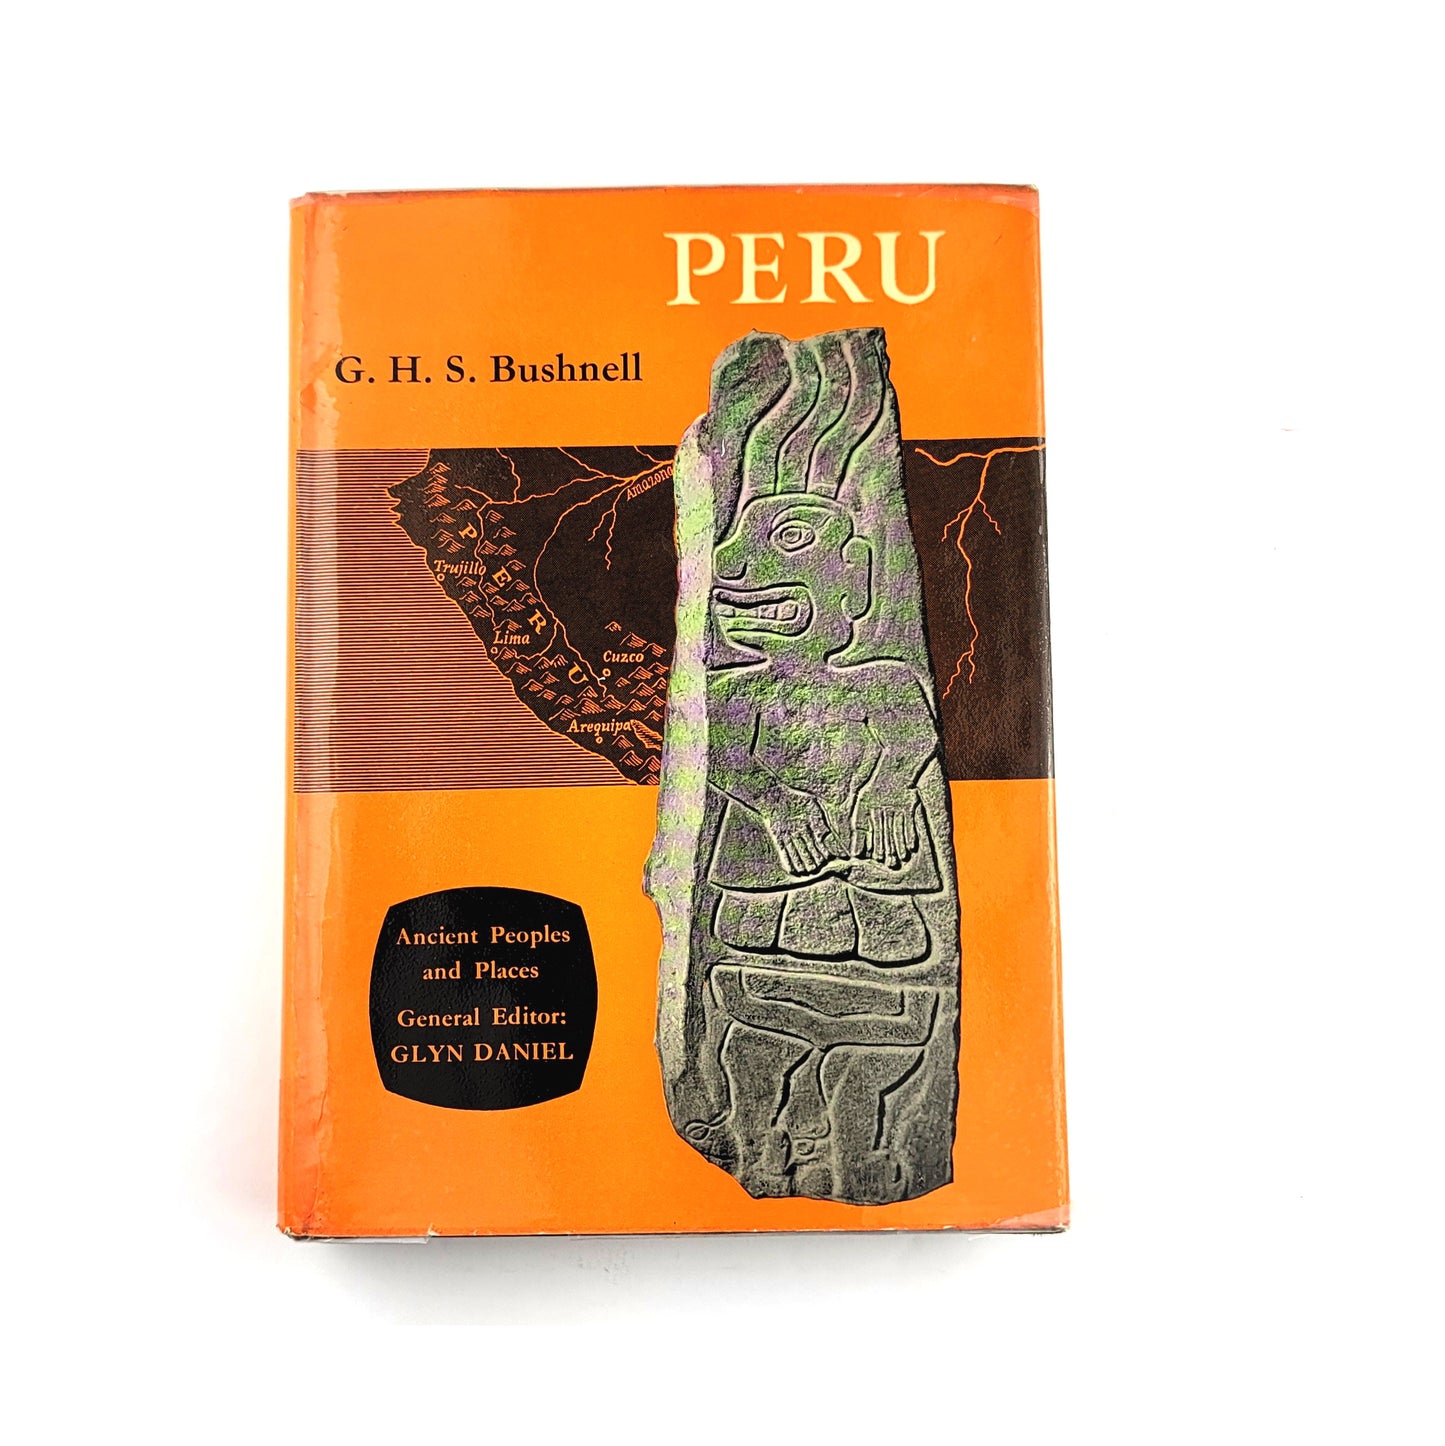 Peru by G.H.S. Bushnell Hardcover